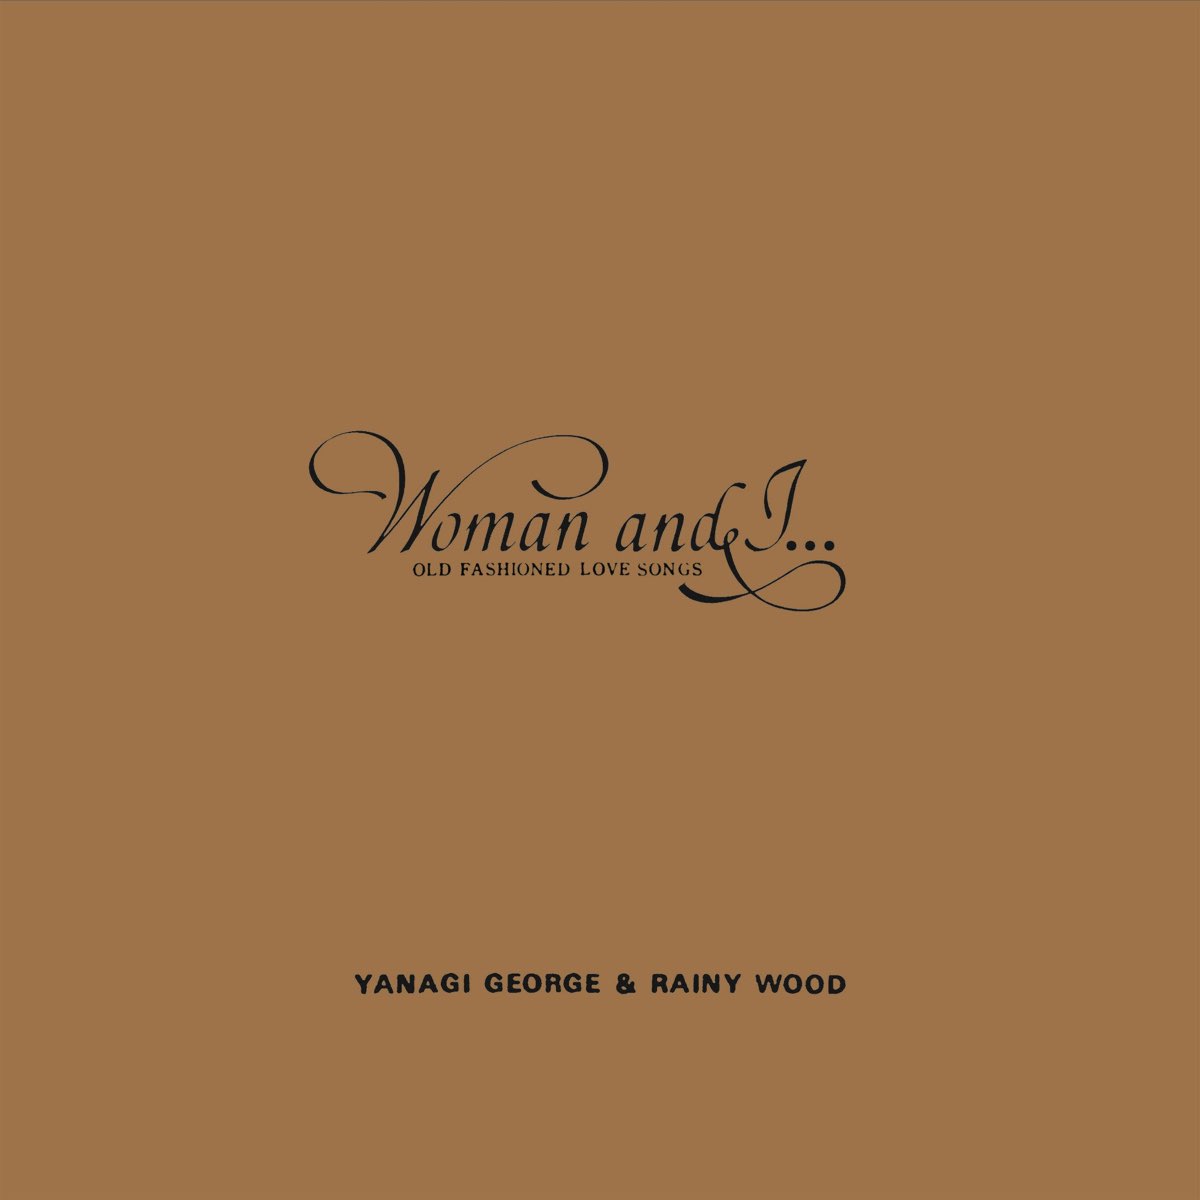 Woman and I... OLD FASHIONED LOVE SONGS - 柳ジョージ&レイニー